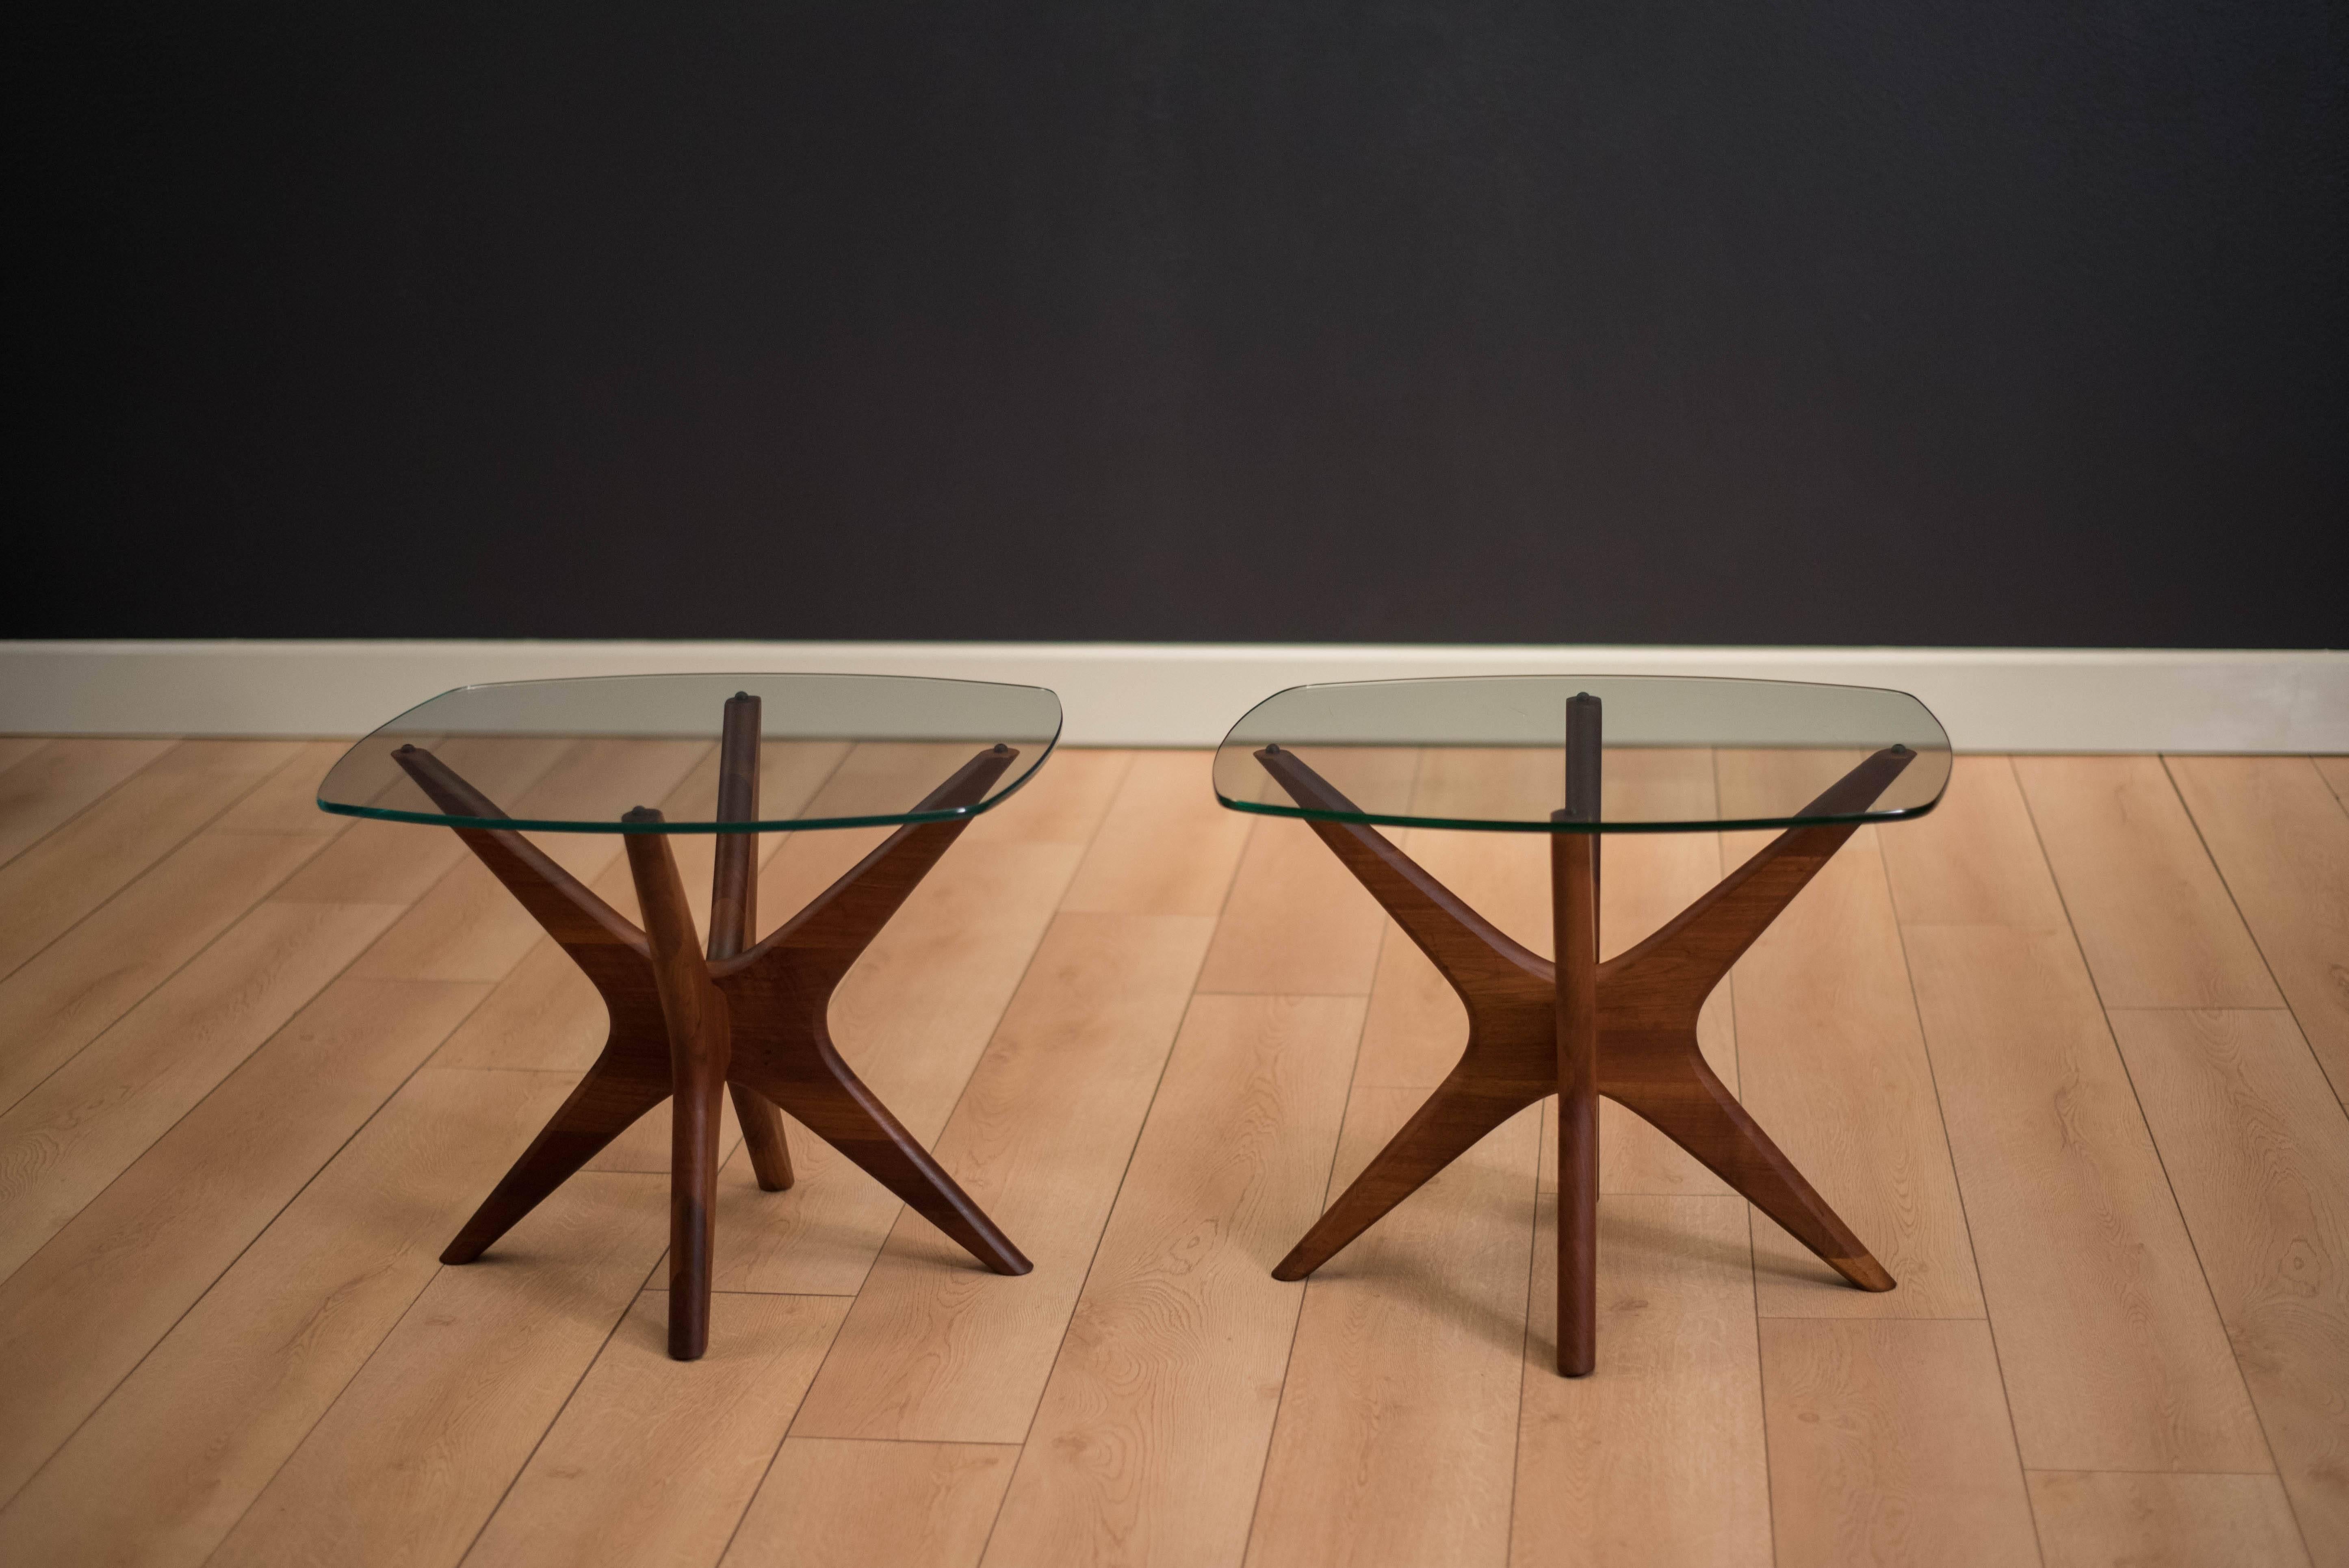 Mid-Century Modern 'Jacks' side tables designed by Adrian Pearsall for Craft Associates. This pair is made of solid sculpted walnut with a curved glass top. Price is for the pair.

